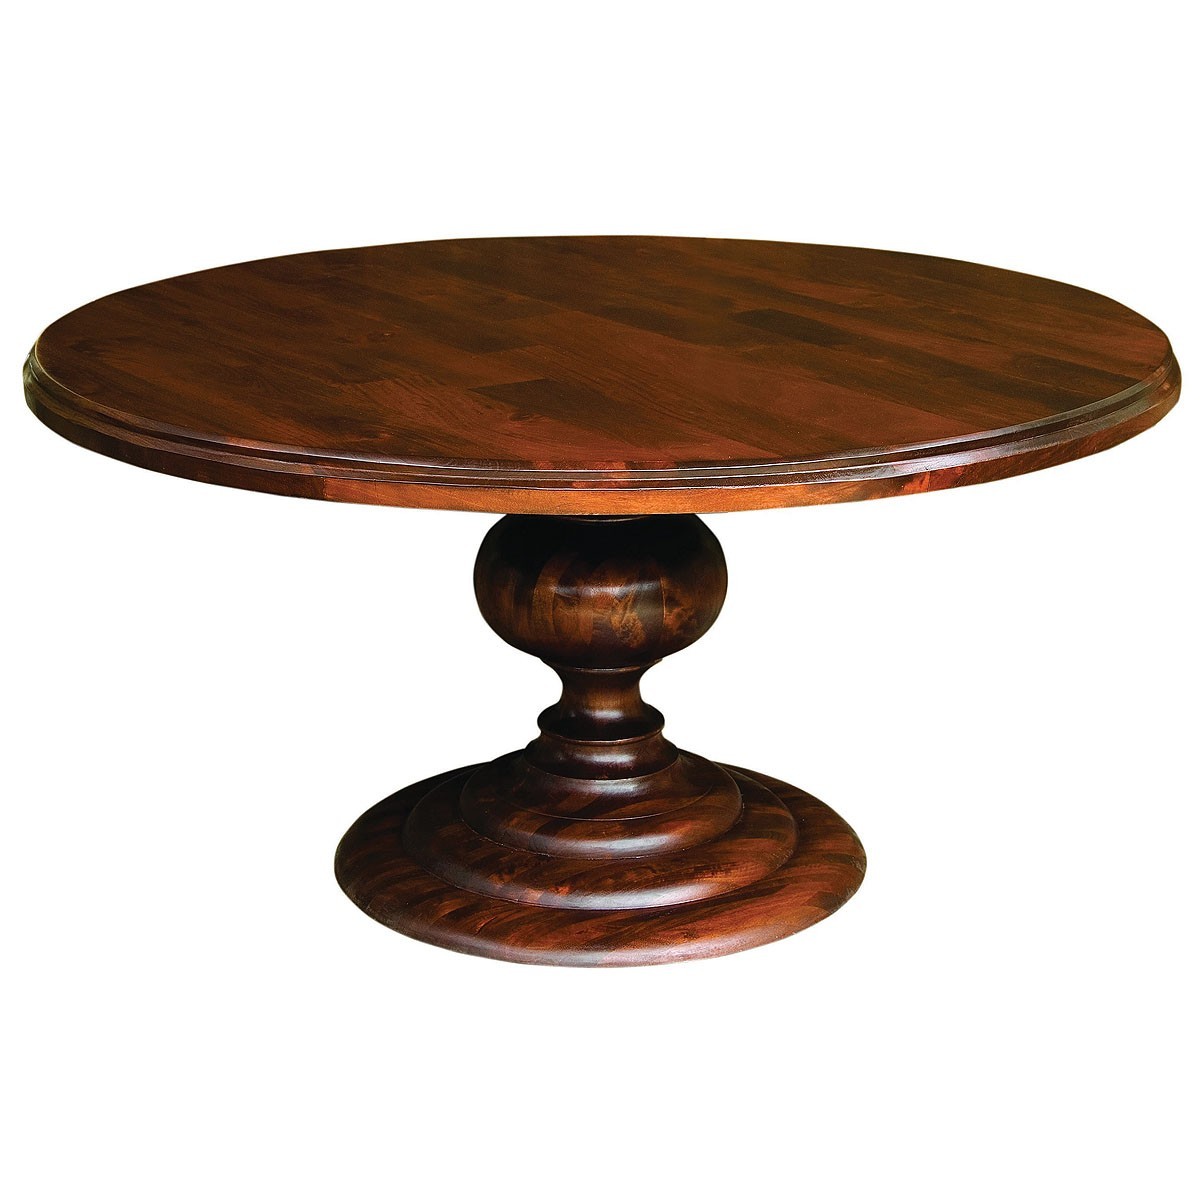 round pedestal dining table solid wood 72 inch round dining table with pedestal base design BGYRDEQ